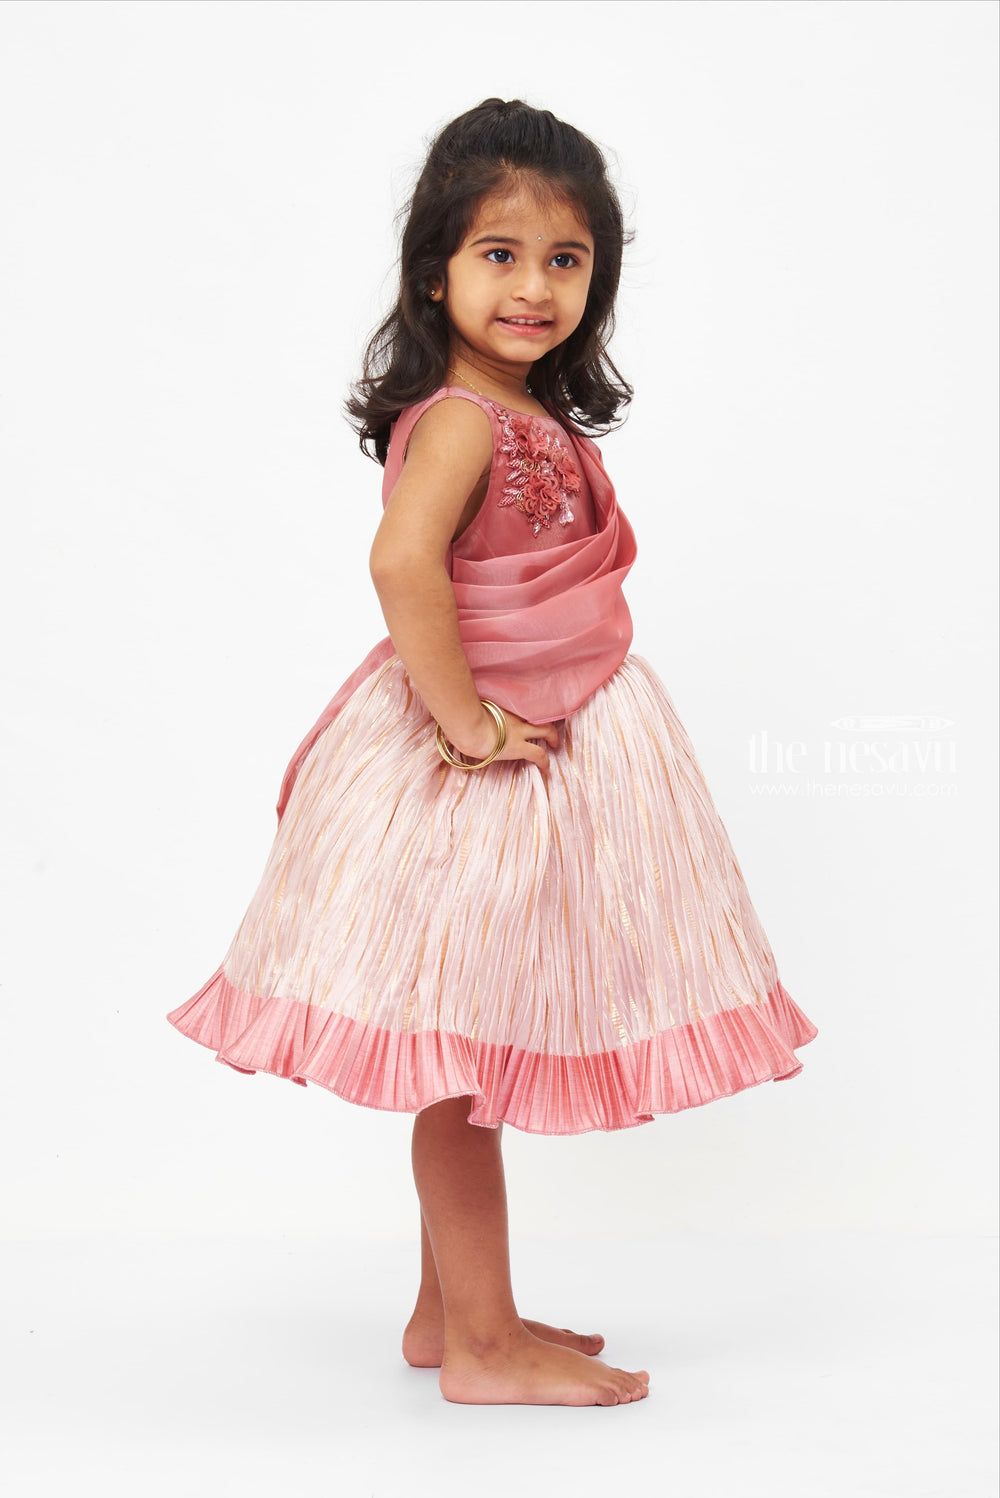 The Nesavu Girls Fancy Party Frock Elegant Rose Gold Layered Party Frock with Embellished Bodice Nesavu Rose Gold Girls' Party Dress - Embellished & Pleated Frock | The Nesavu